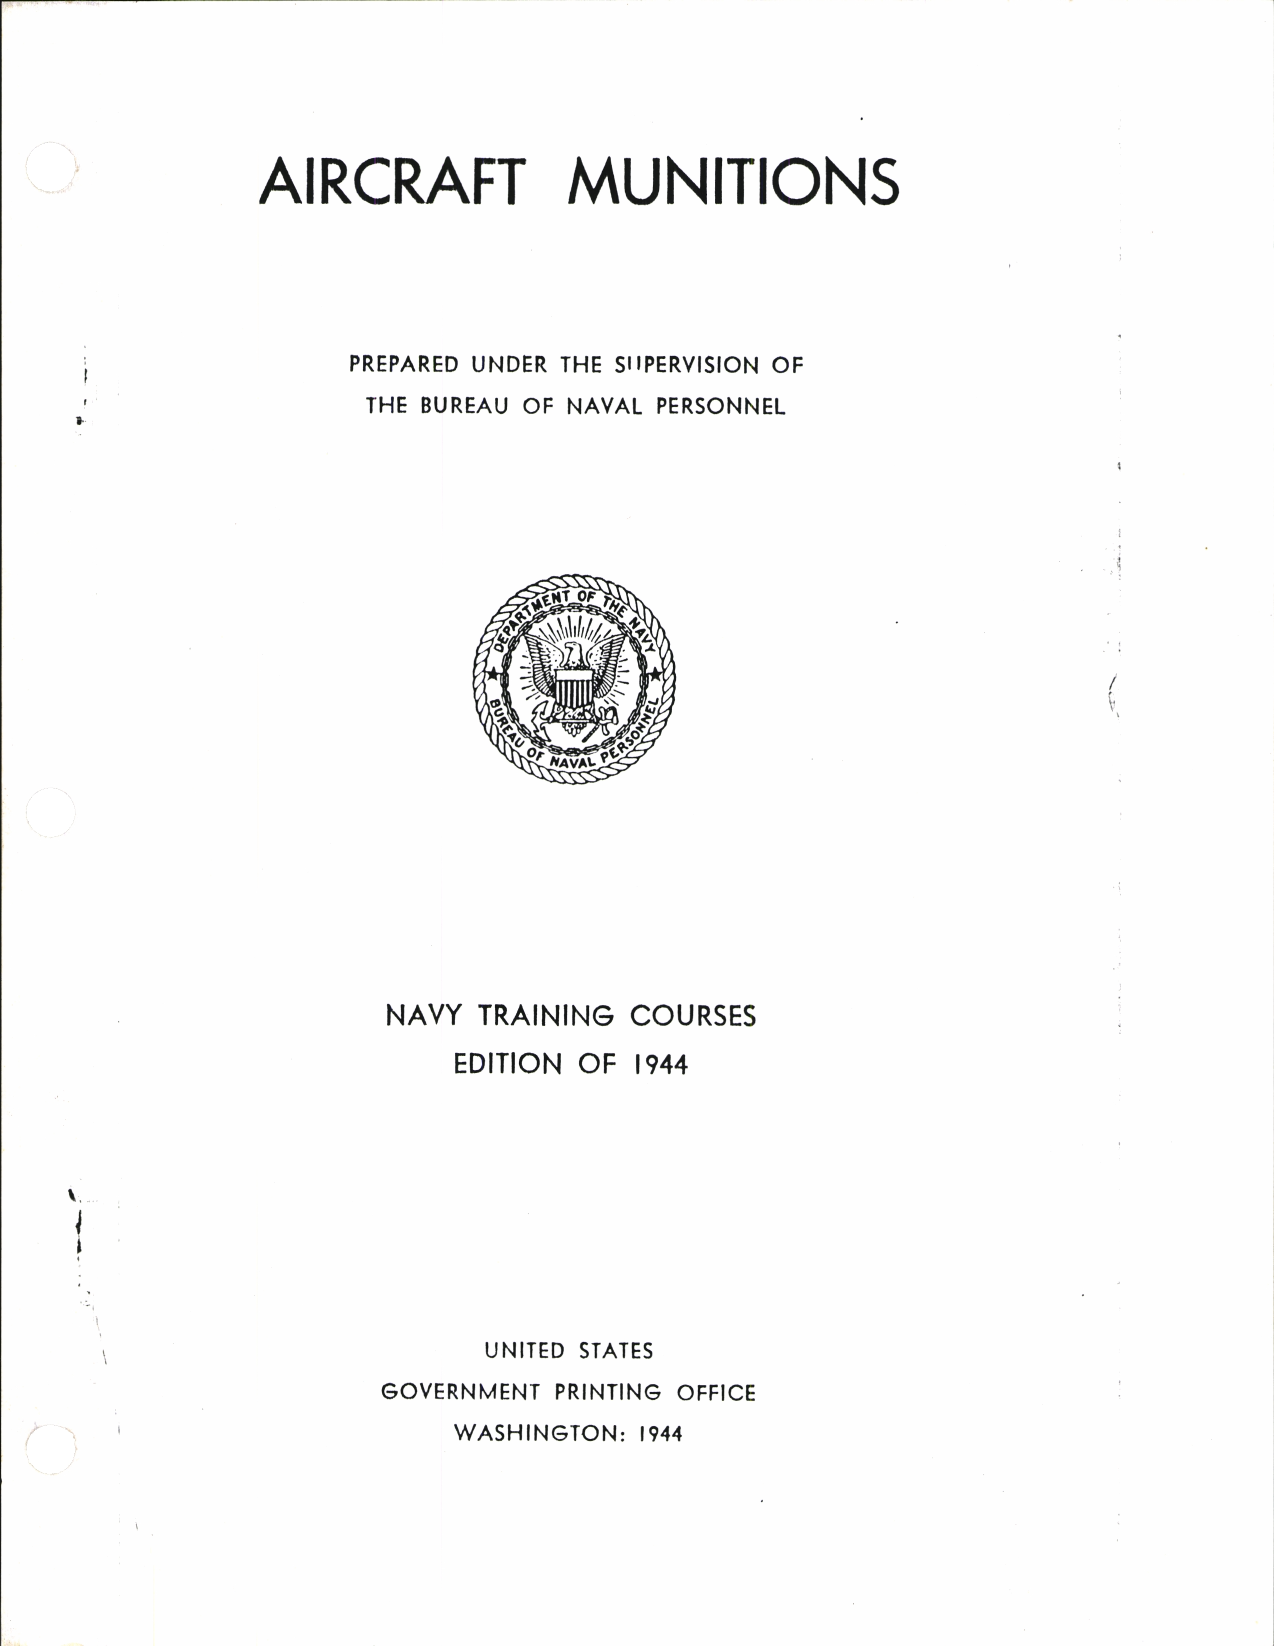 Sample page 1 from AirCorps Library document: Aircraft Munitions